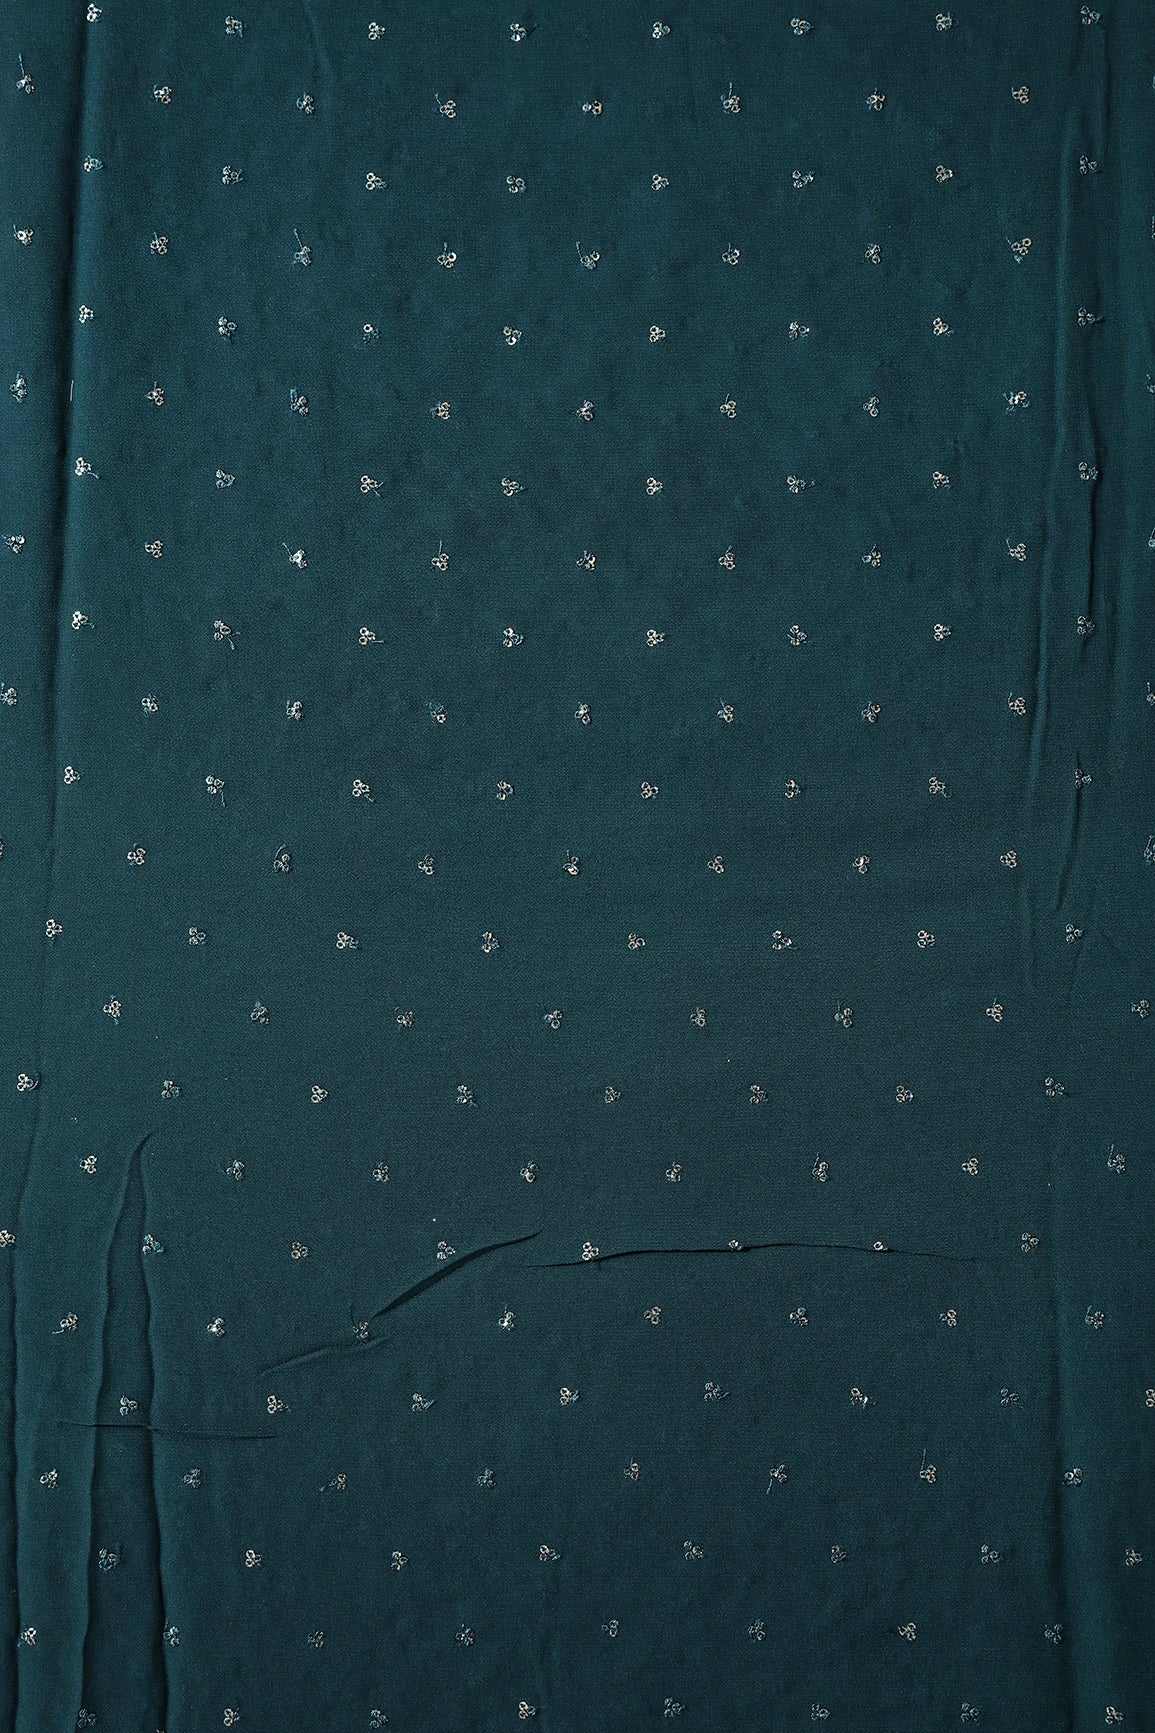 Small Motif Sequins Embroidery On Prussian Blue Viscose Georgette Fabric - doeraa